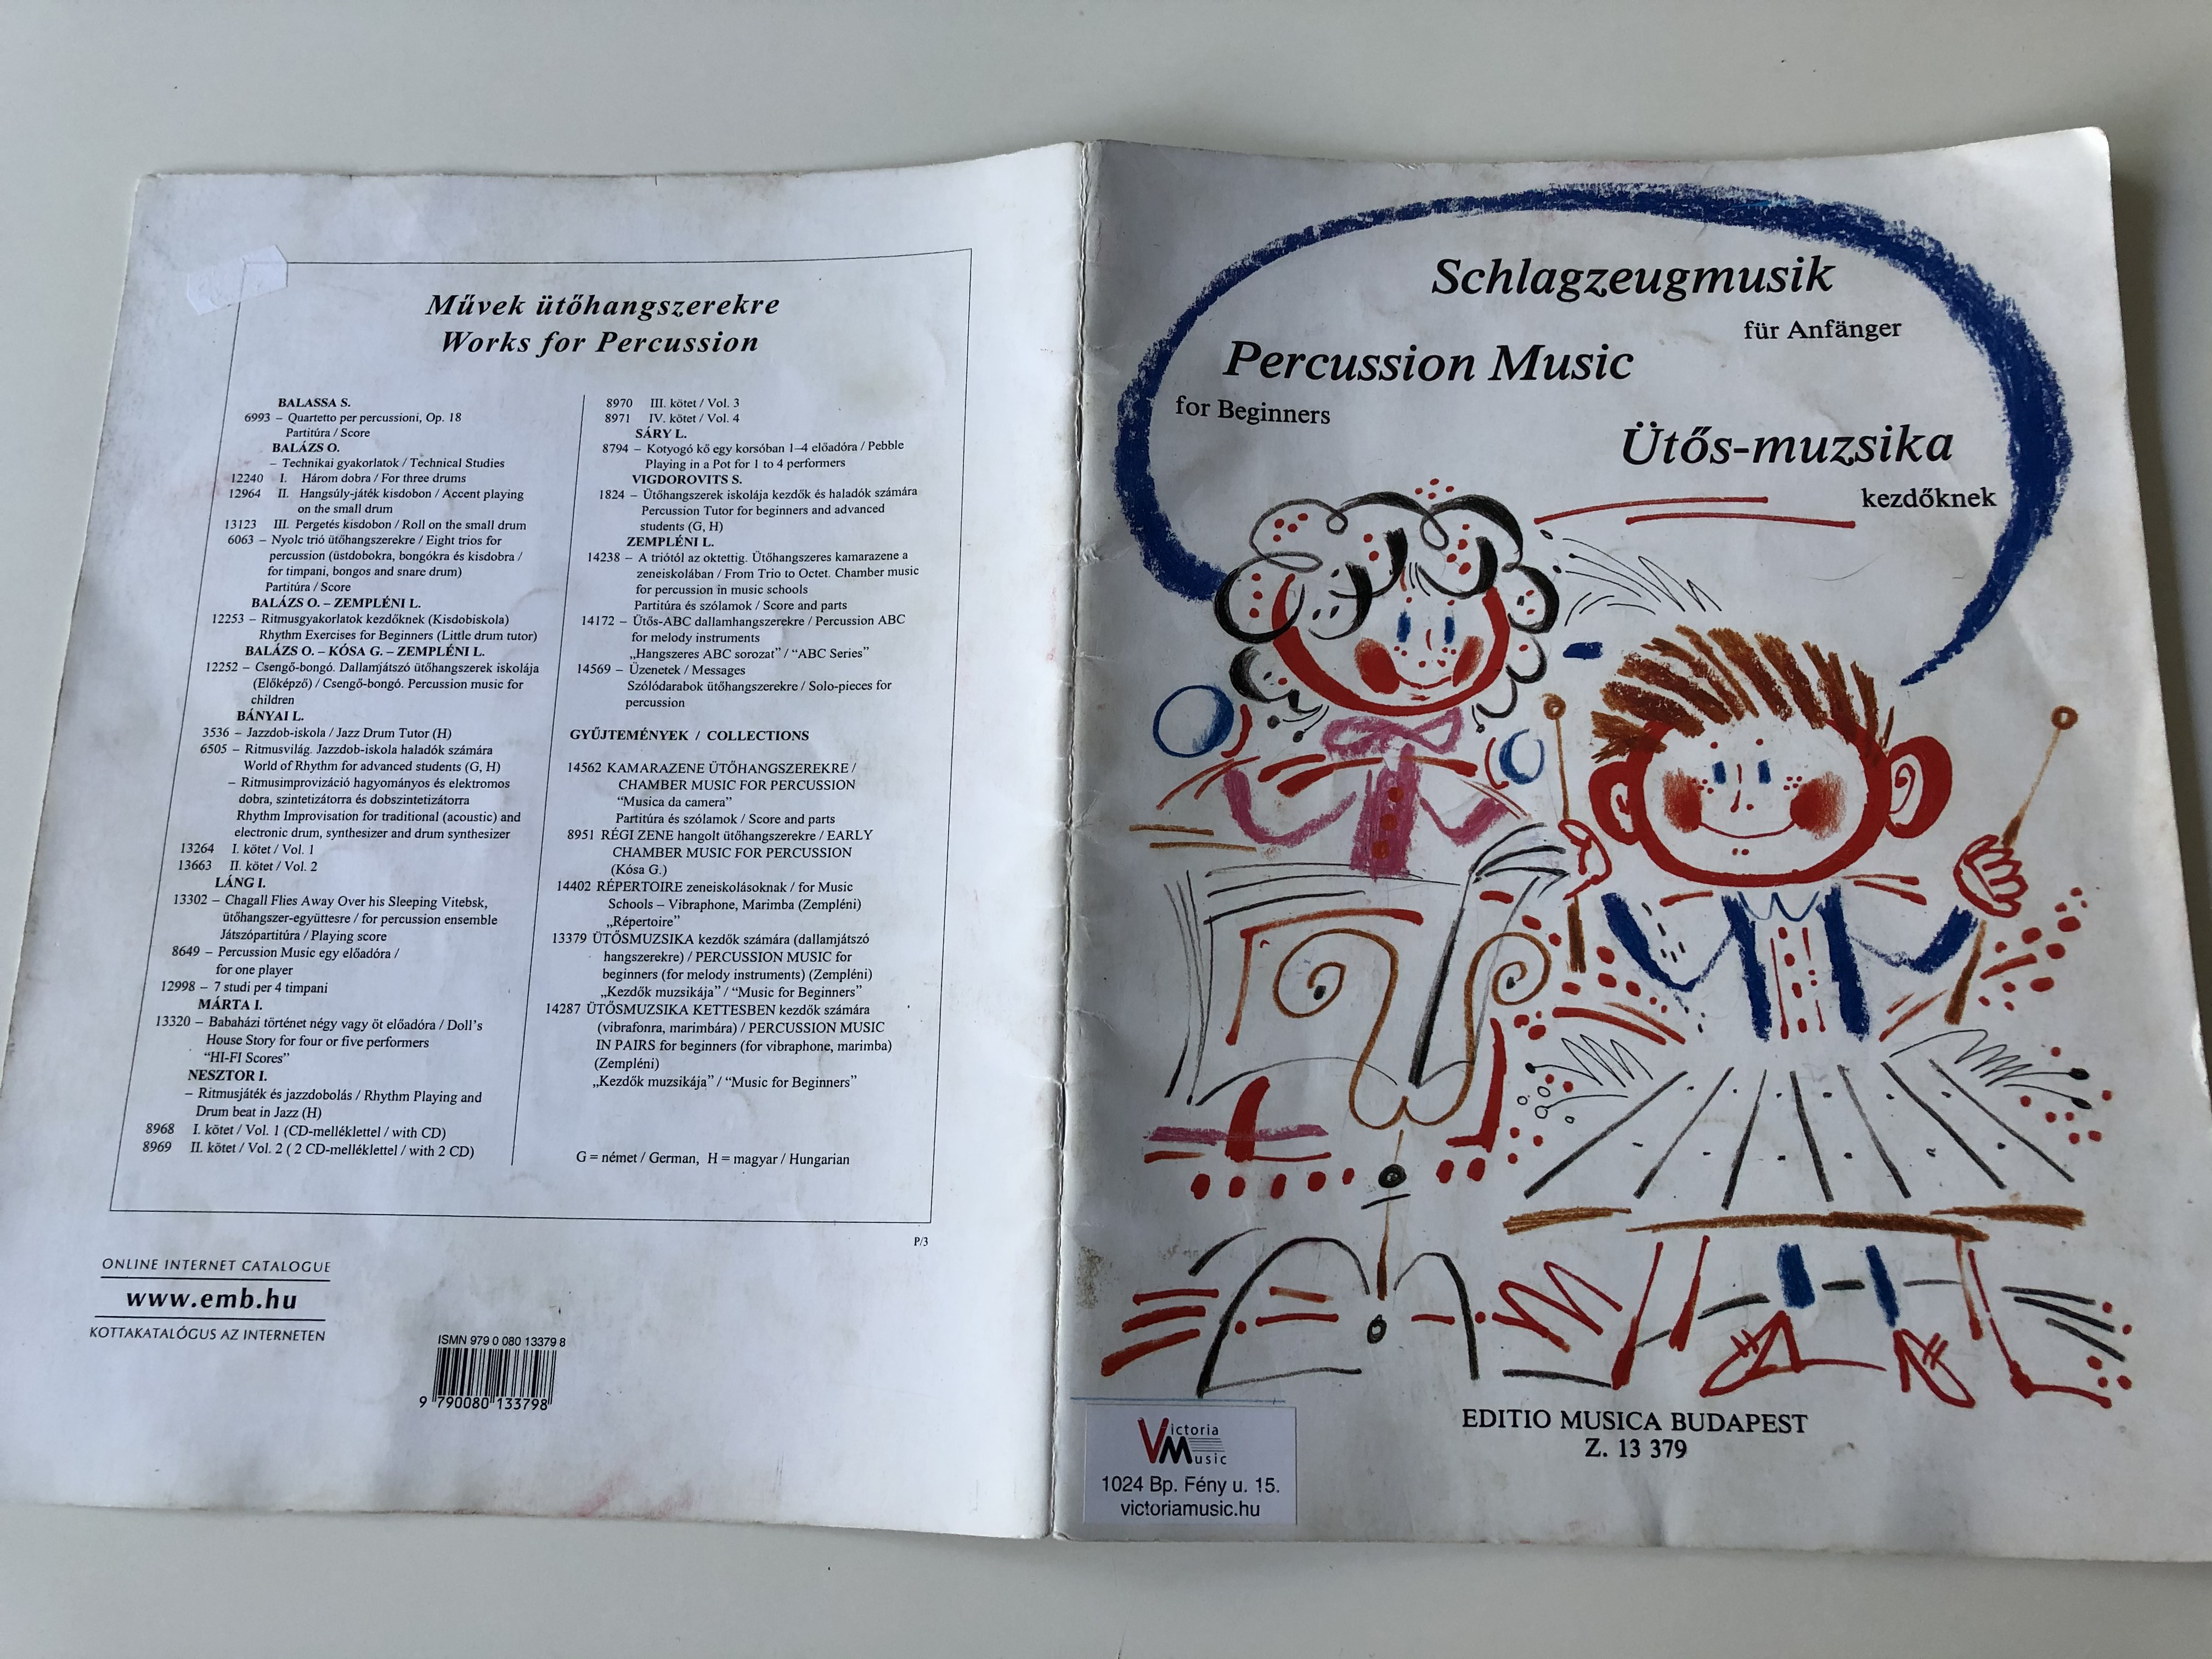 Percussion Music for Begginers - Ütős-muzsika kezdőknek by Zempléni László  / Schlagzeugmusik für Anfänger / Editio Musica Budapest /  English-German-Hungarian book with musical notes for melodic instruments /  Paperback - Bible in My Language